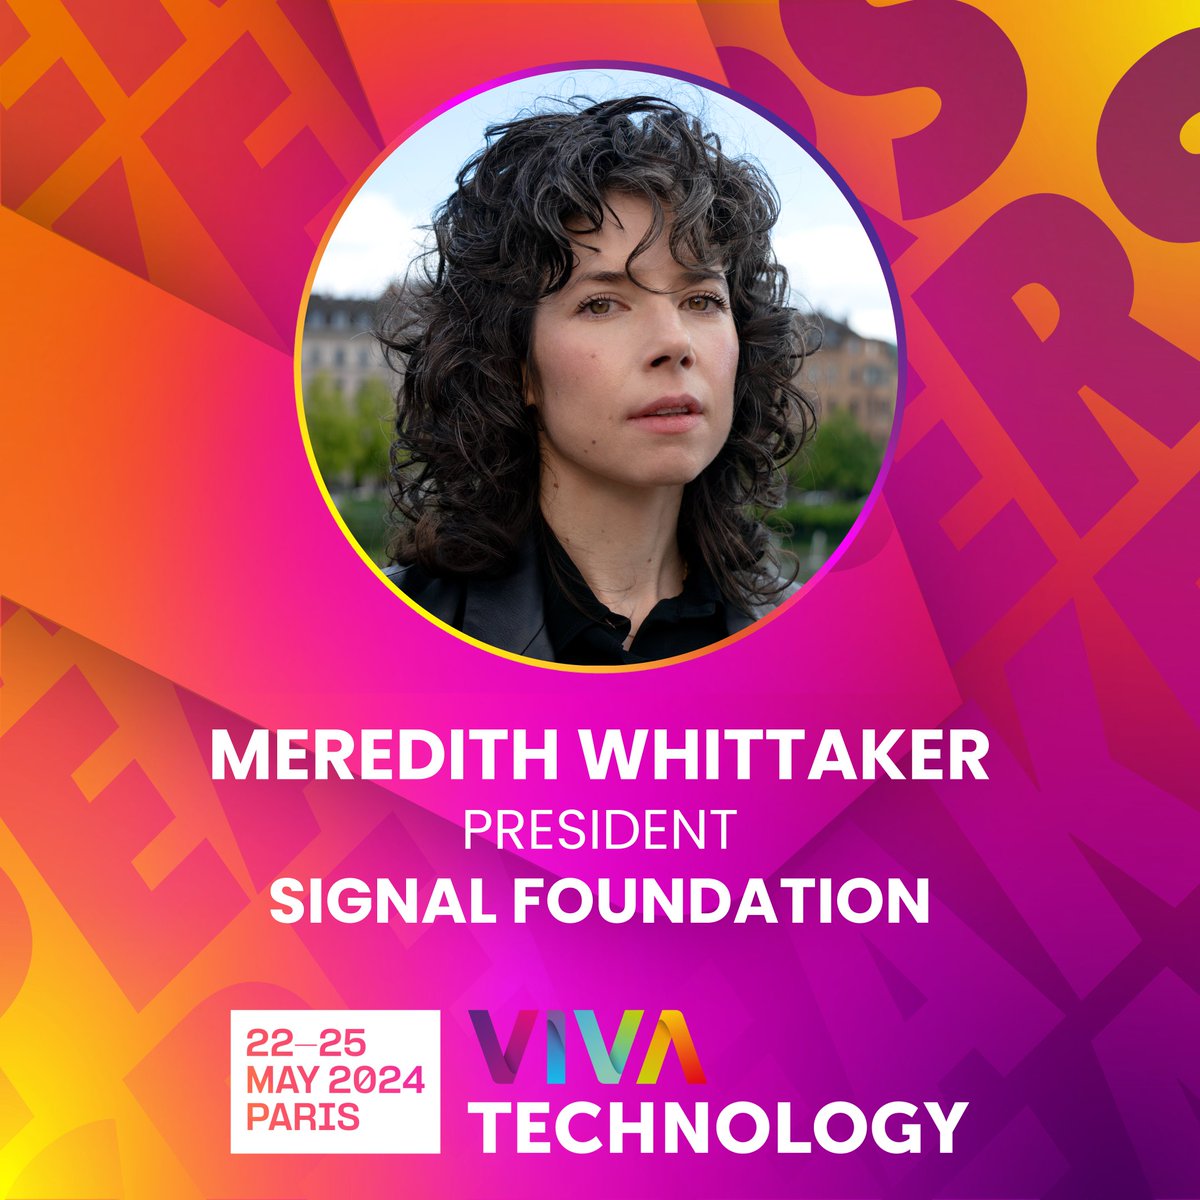 💥Meredith Whittaker @mer__edith, President @signalapp, is joining us at #VivaTech 2024! With 17+ years of experience in tech, she continues to be a true pioneer in AI & internet policy. The quest for safe, profitable & ethical AI is happening on stage next week 👊